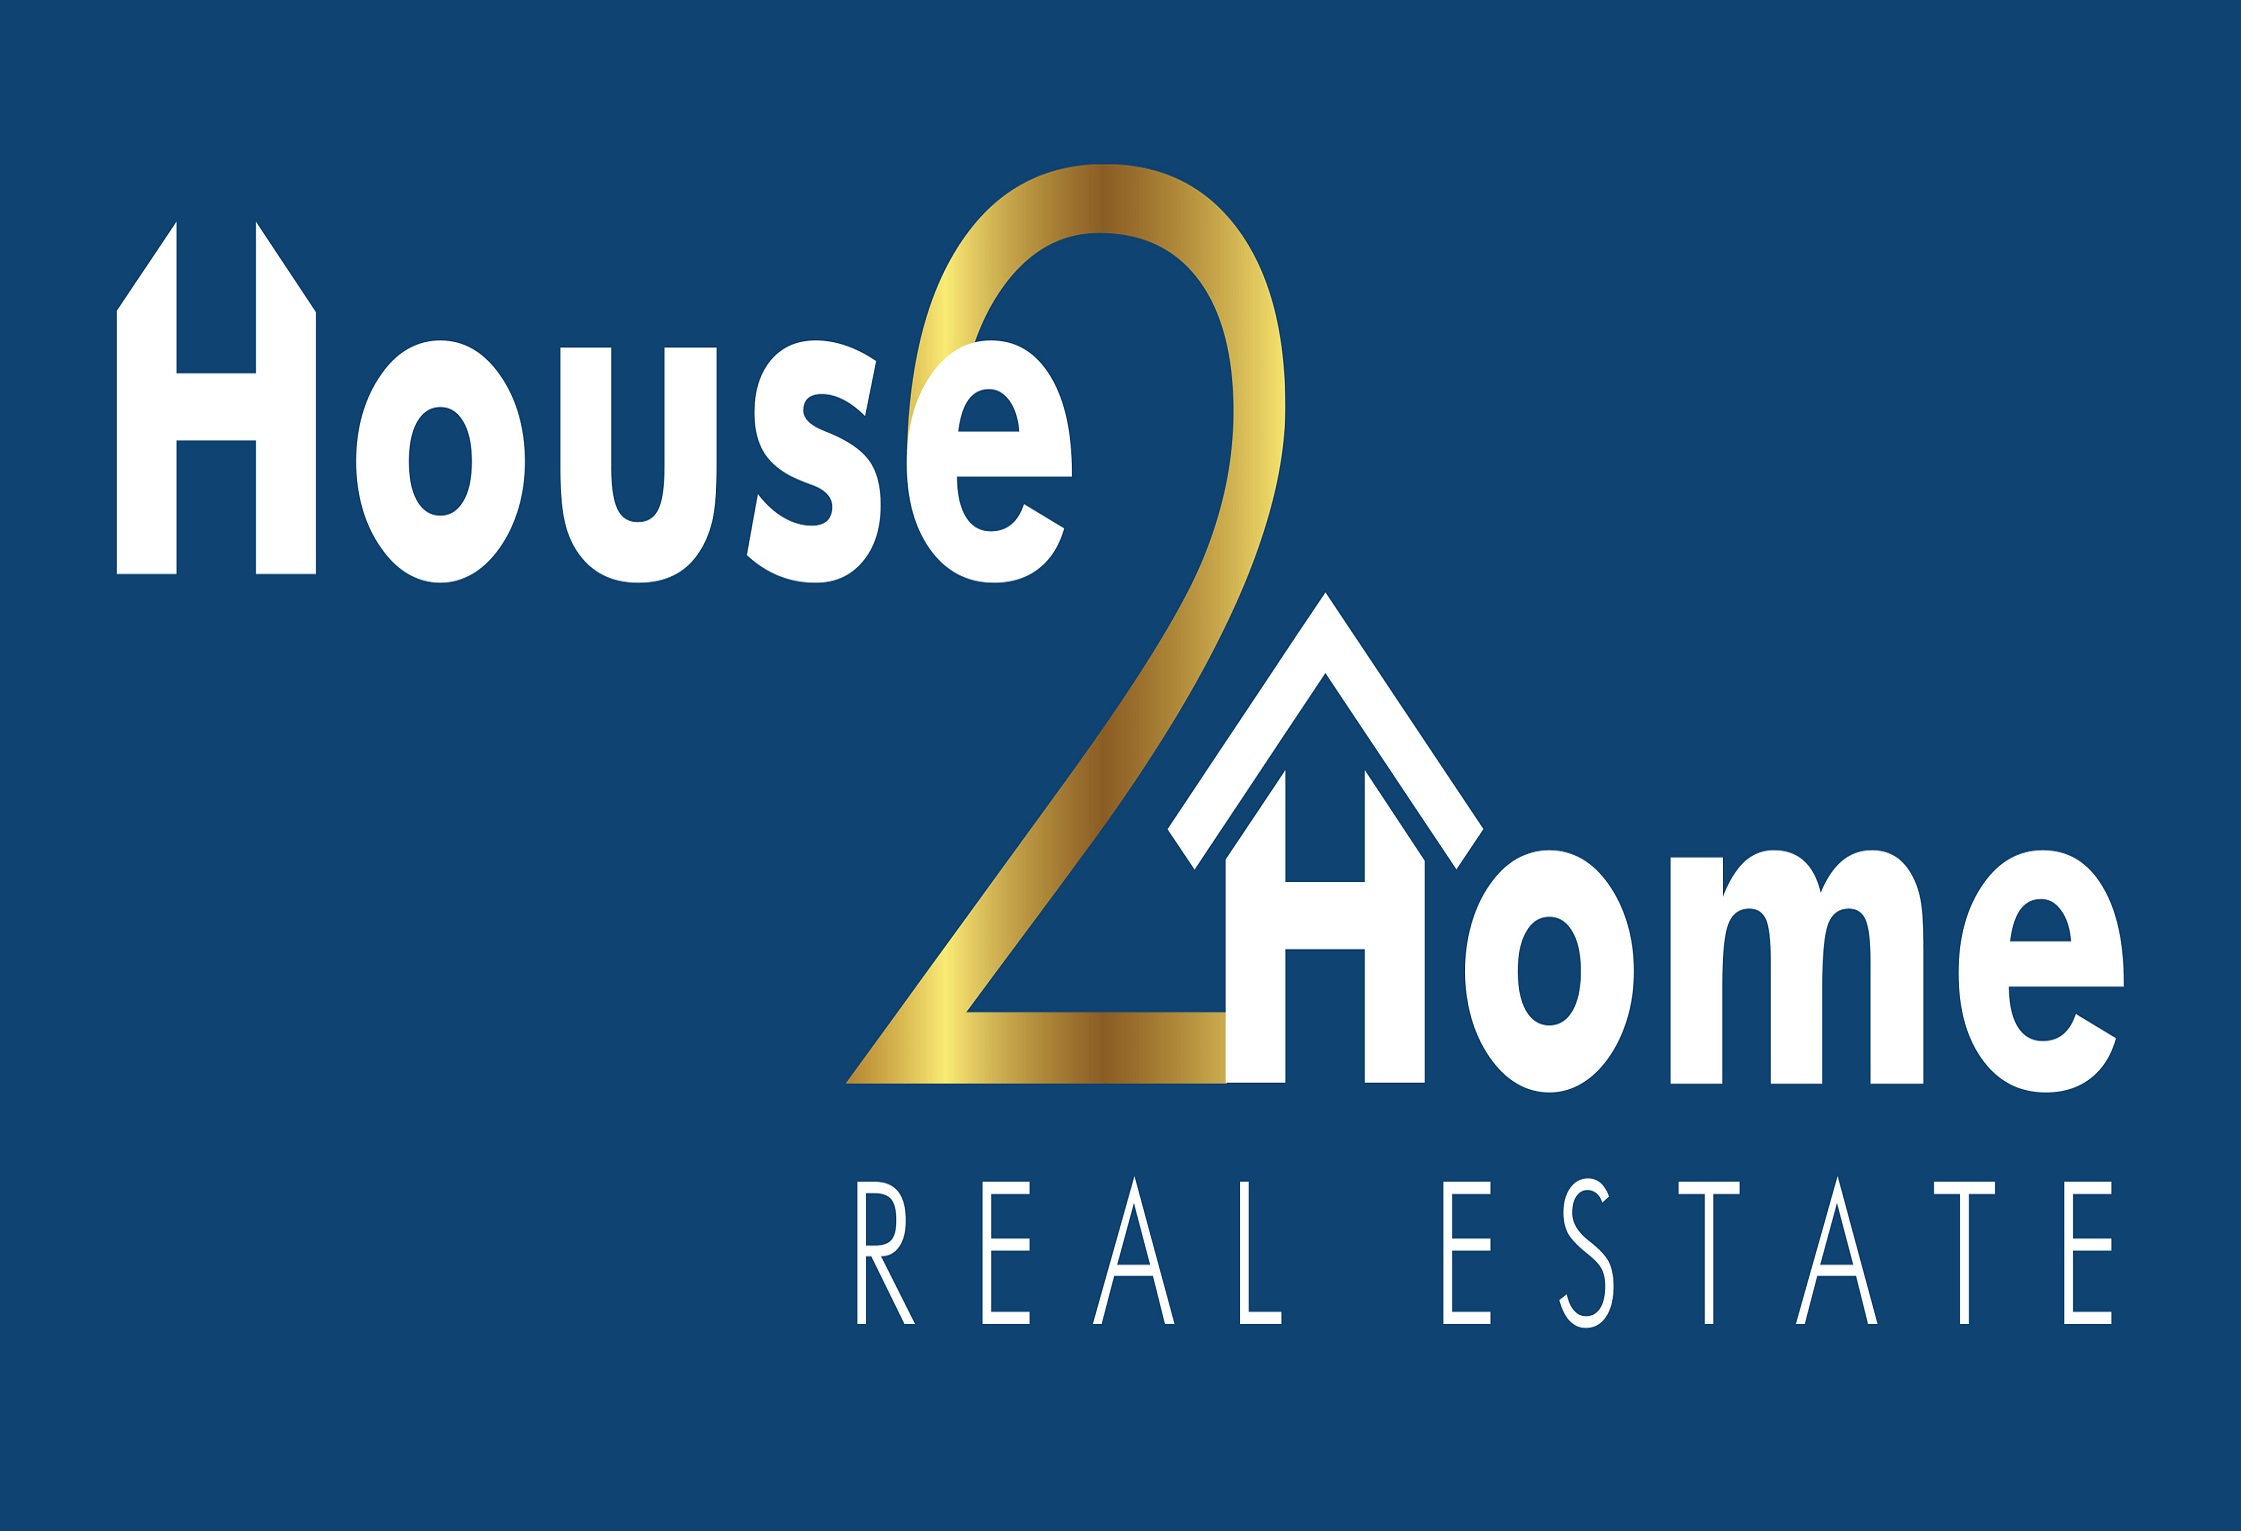 House2Home Real Estate Properties